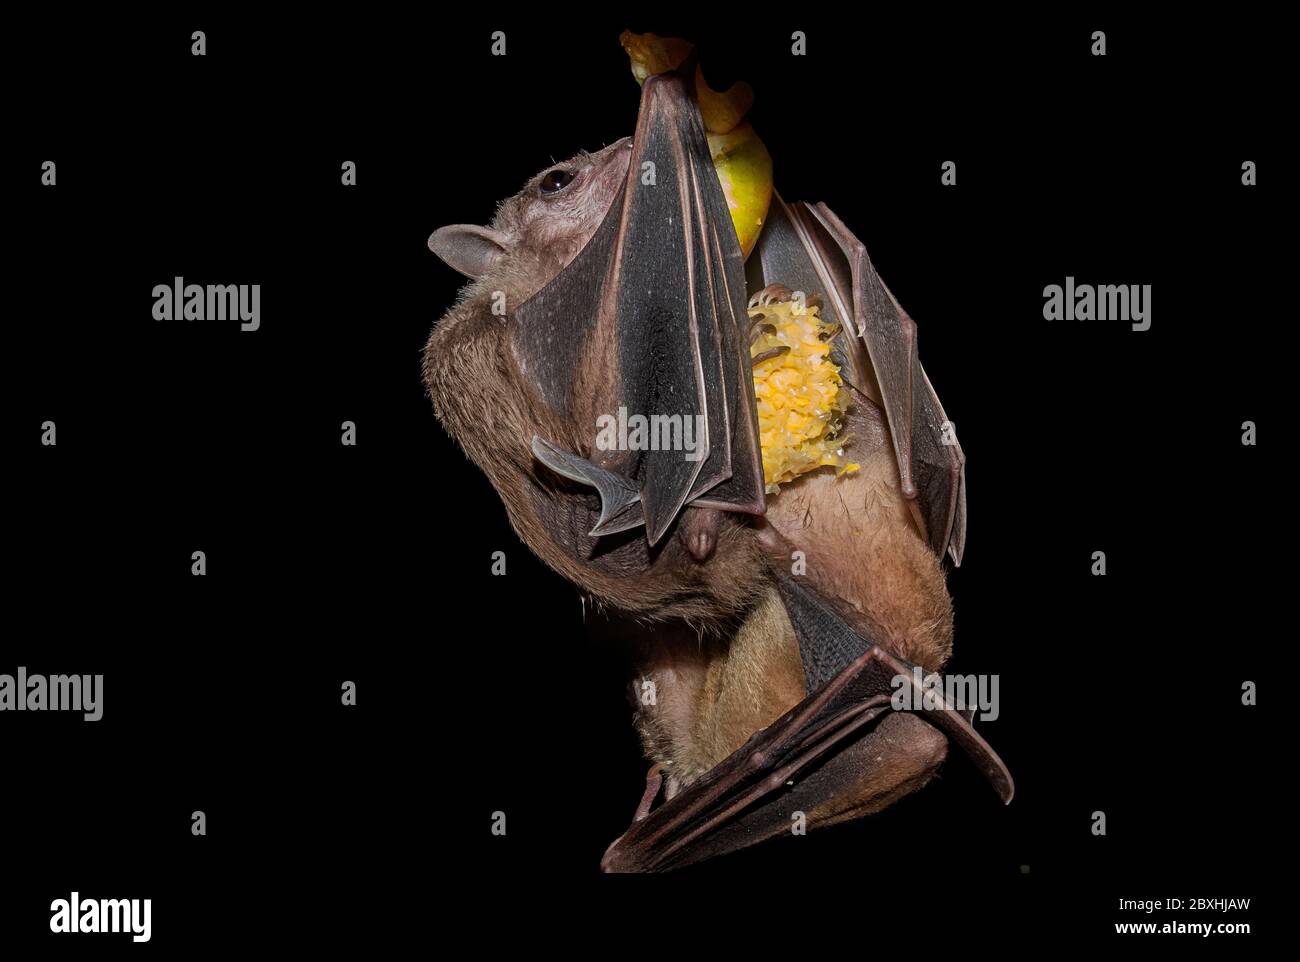 Fruit Bats in flight and Eating Stock Photo